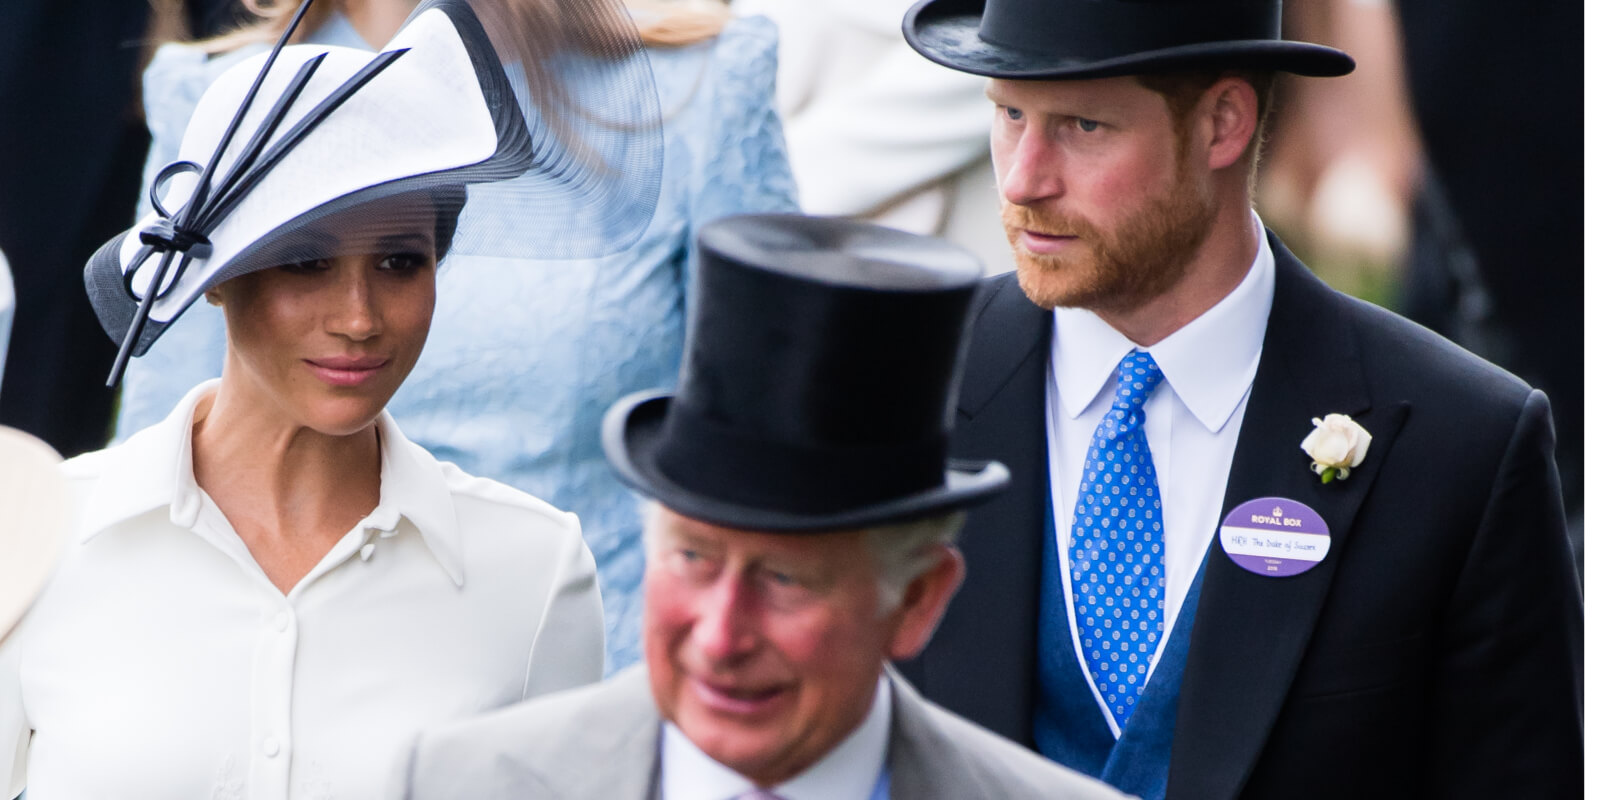 Meghan Markle, Prince Harry and King Charles III at Royal Ascot Day 1 at Ascot Racecourse on June 19, 2018.